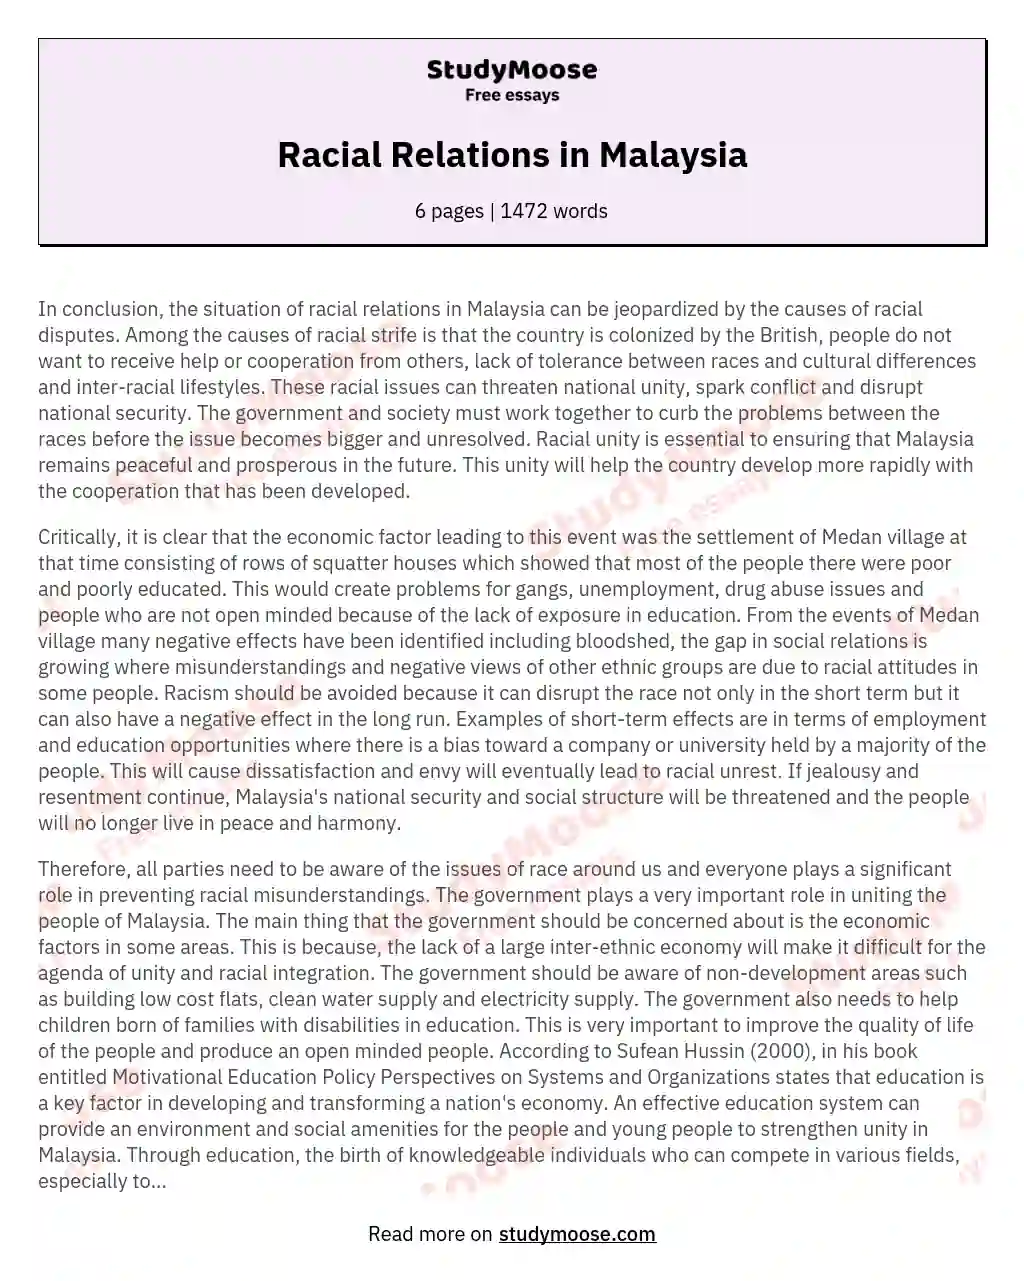 Racial Relations in Malaysia essay